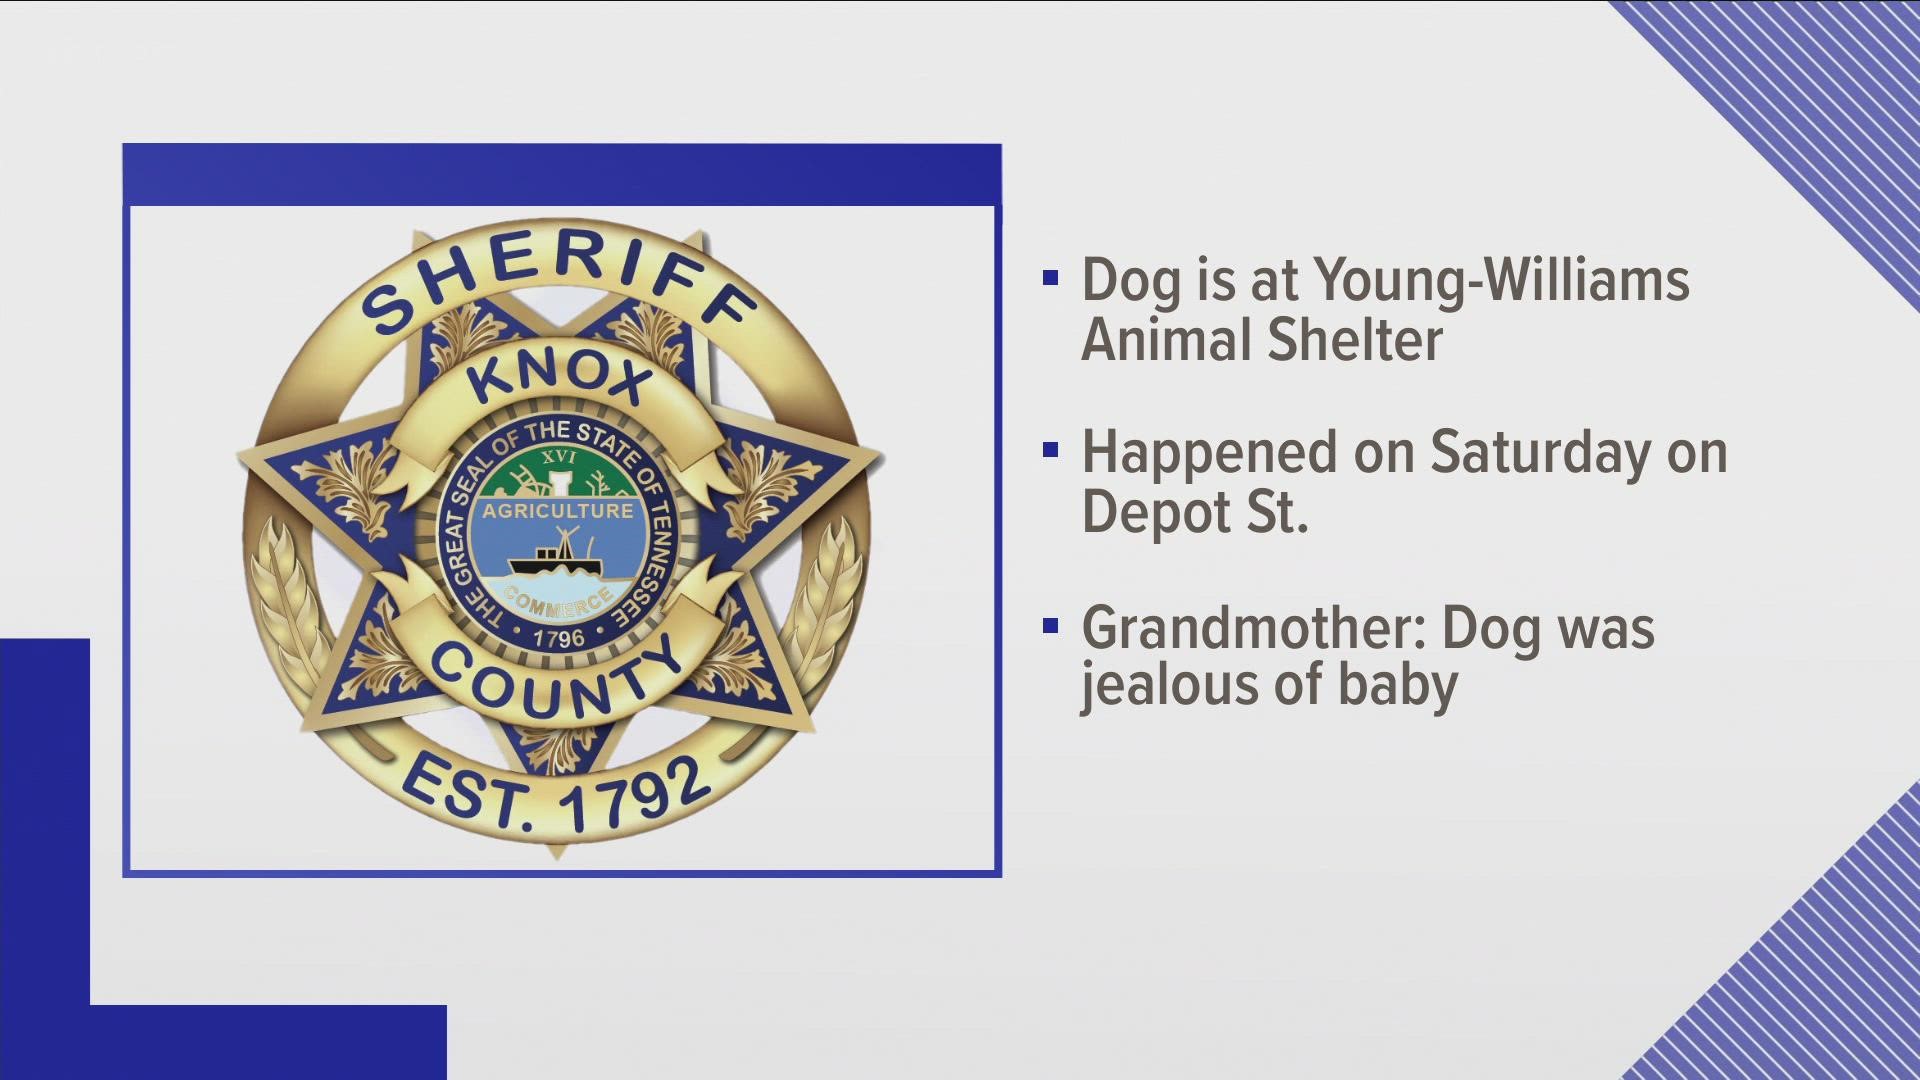 A dog that attacked a 7-month-old baby is now at an animal shelter.